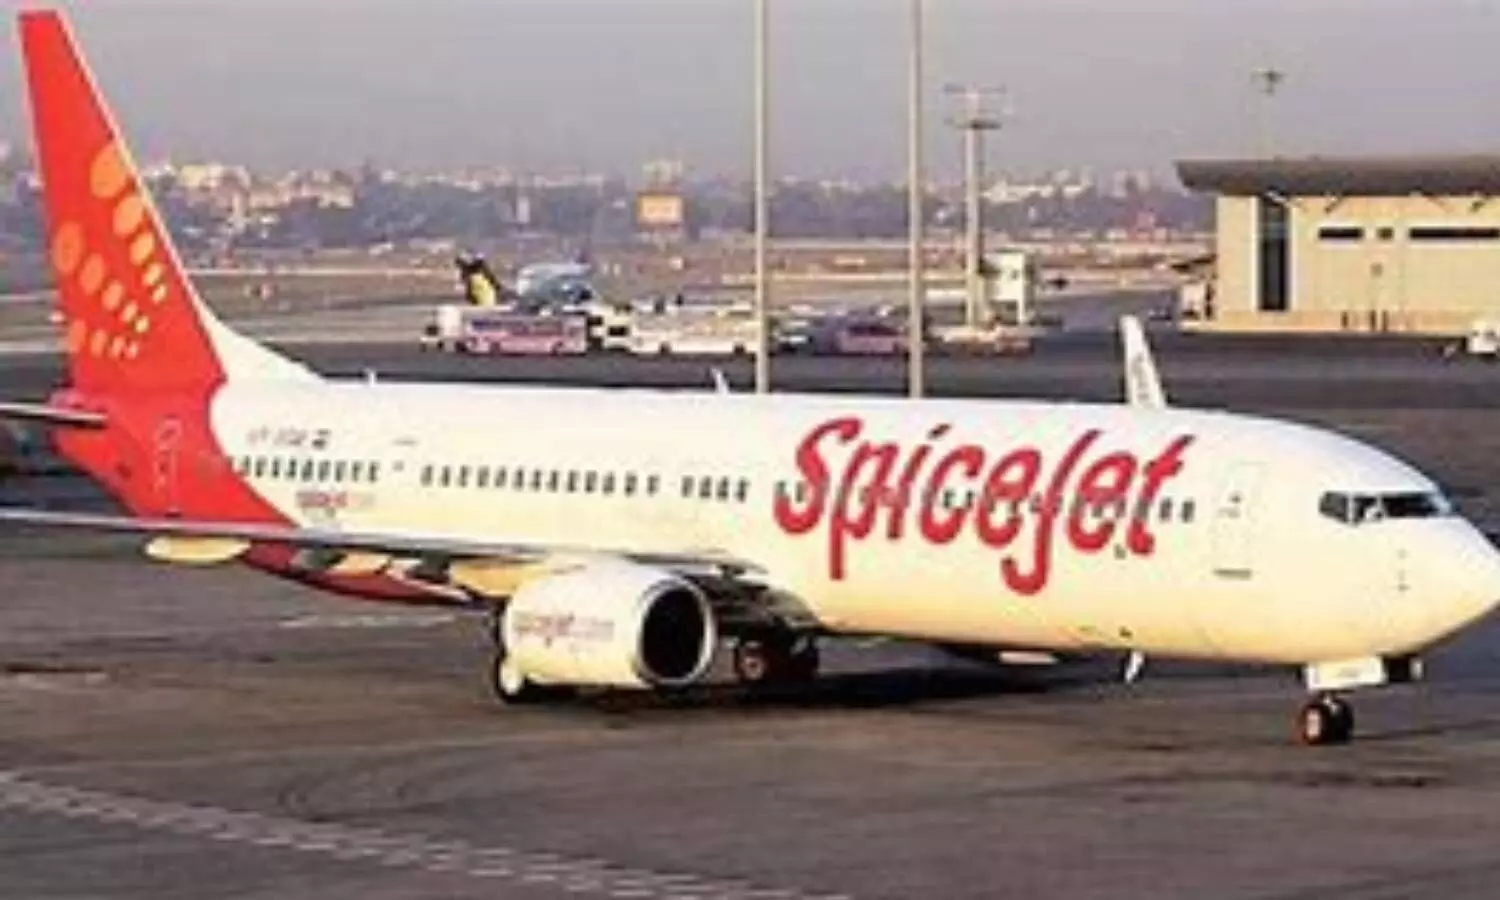 On-ground SpiceJet aircraft hits pole at IGI airport